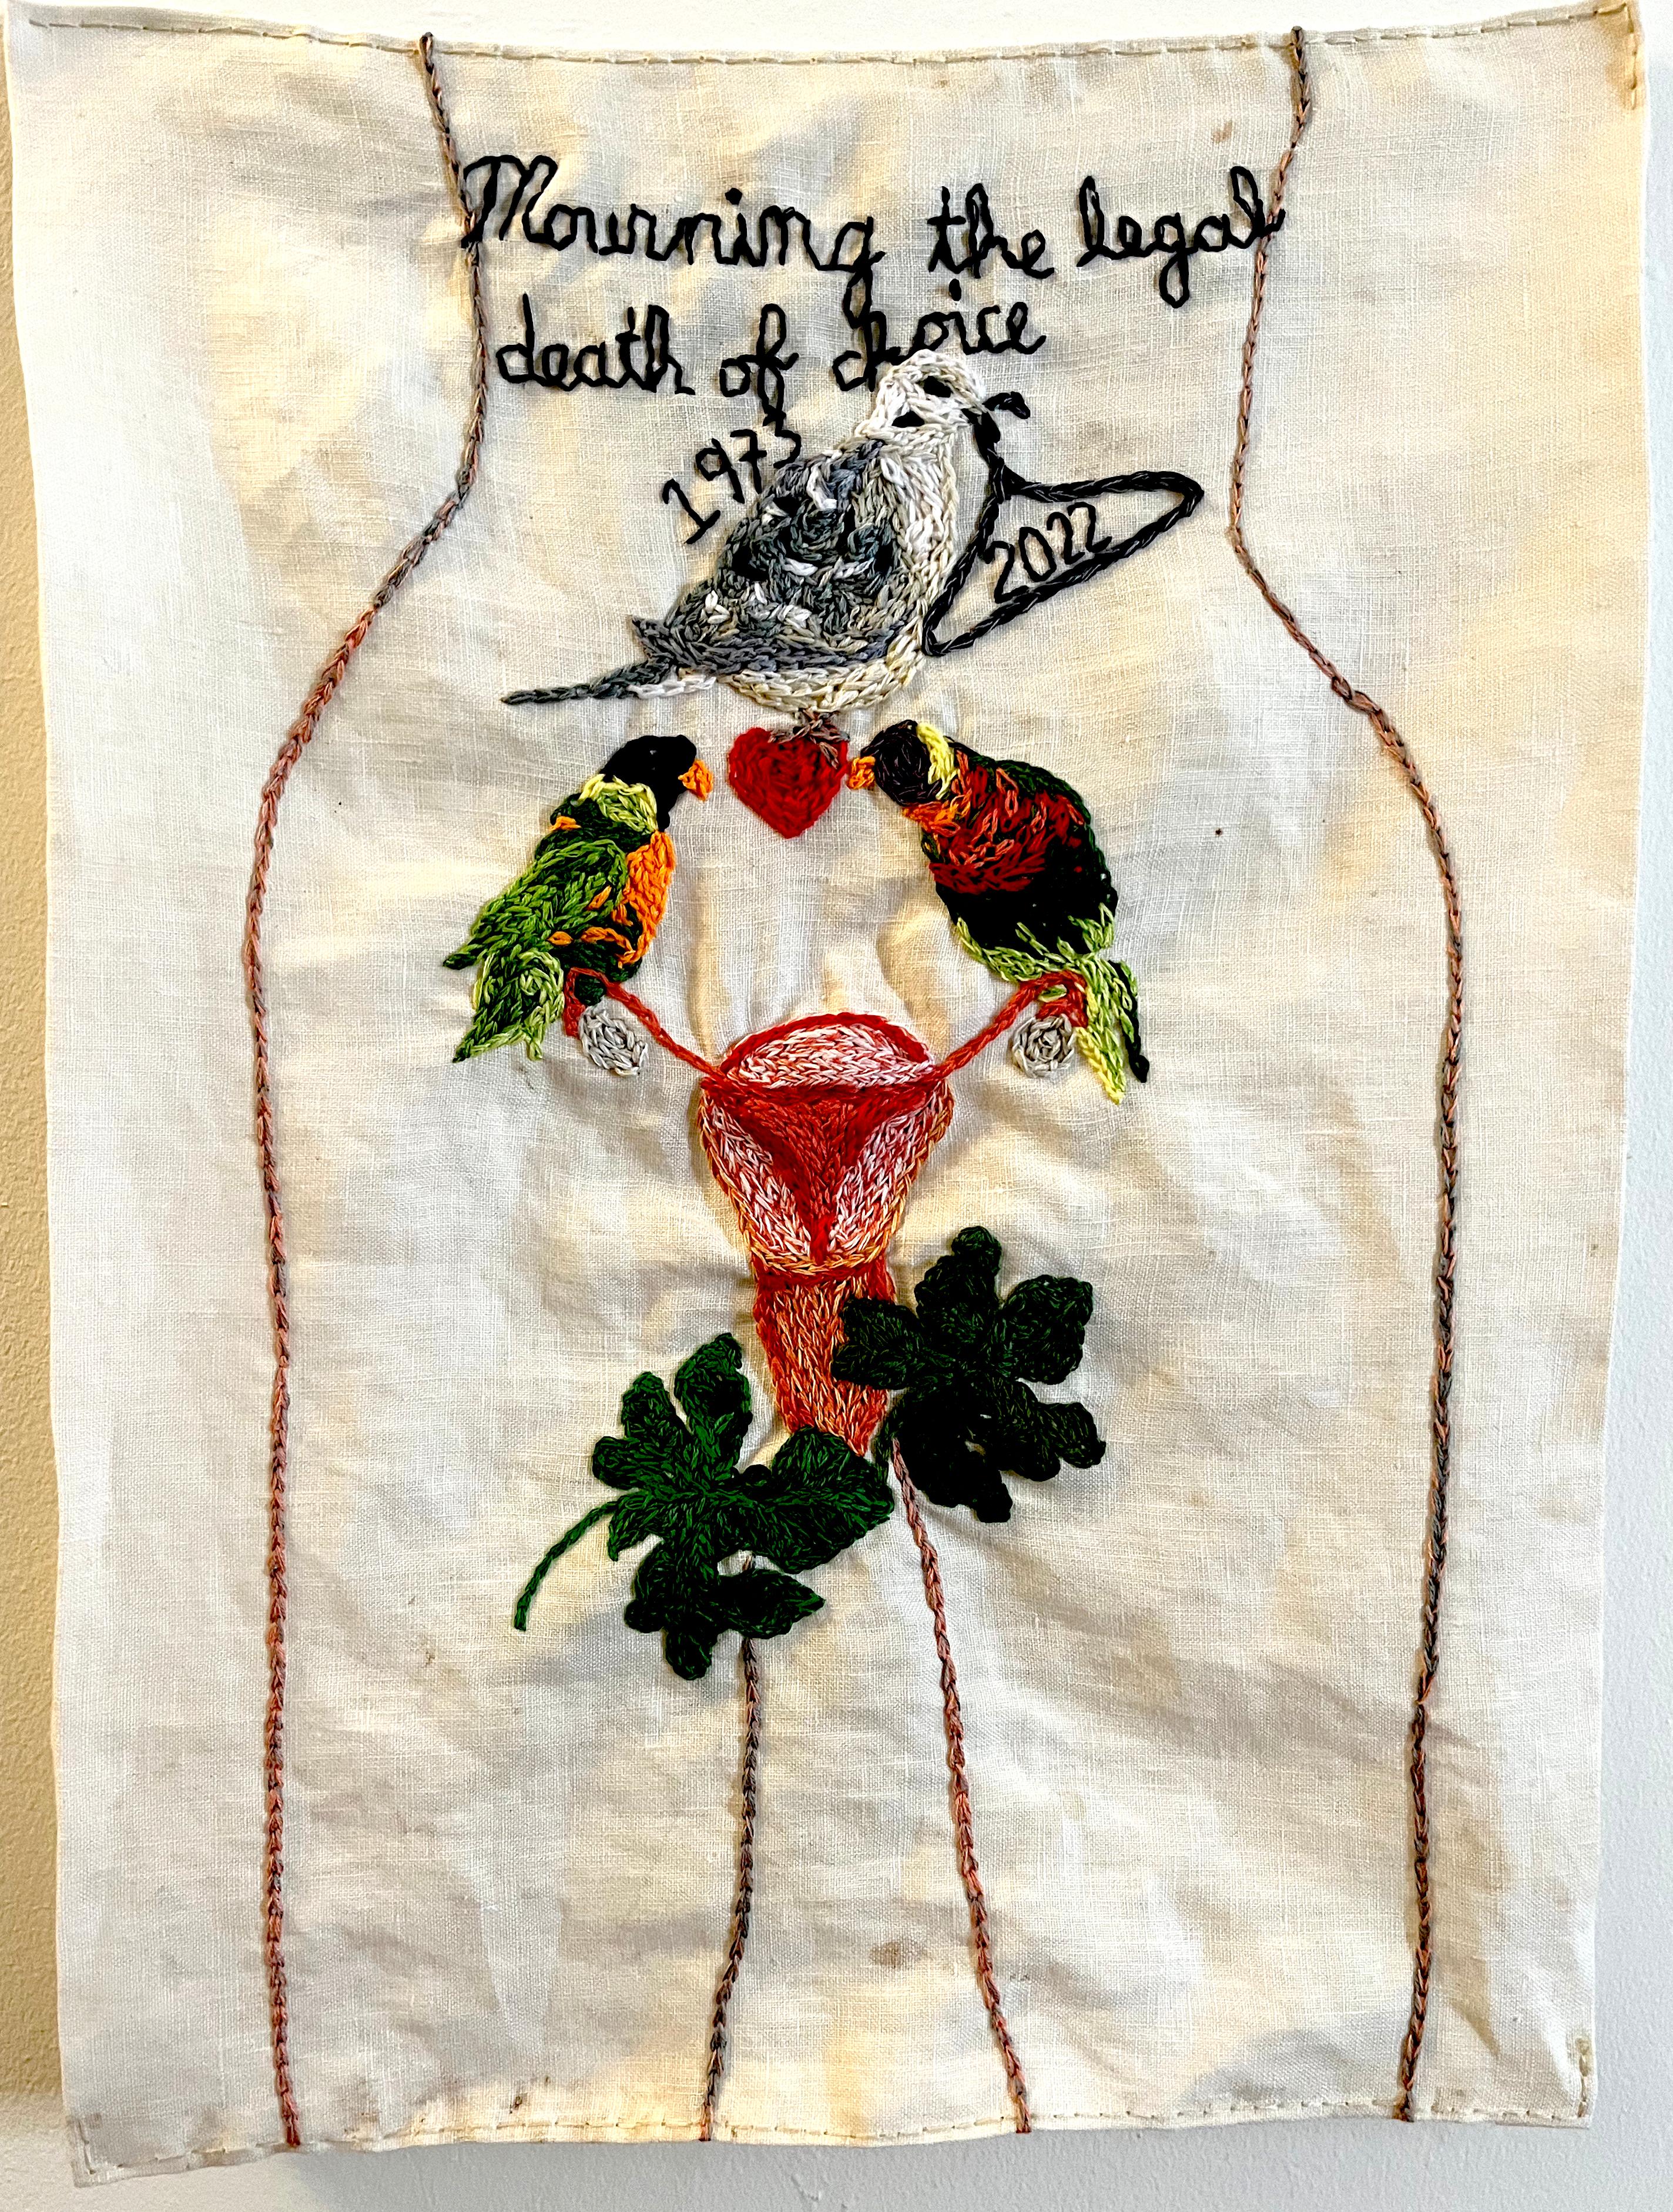 Women Fertility Pro Choice - embroidery with floral design on vintage fabric - Mixed Media Art by Iviva Olenick